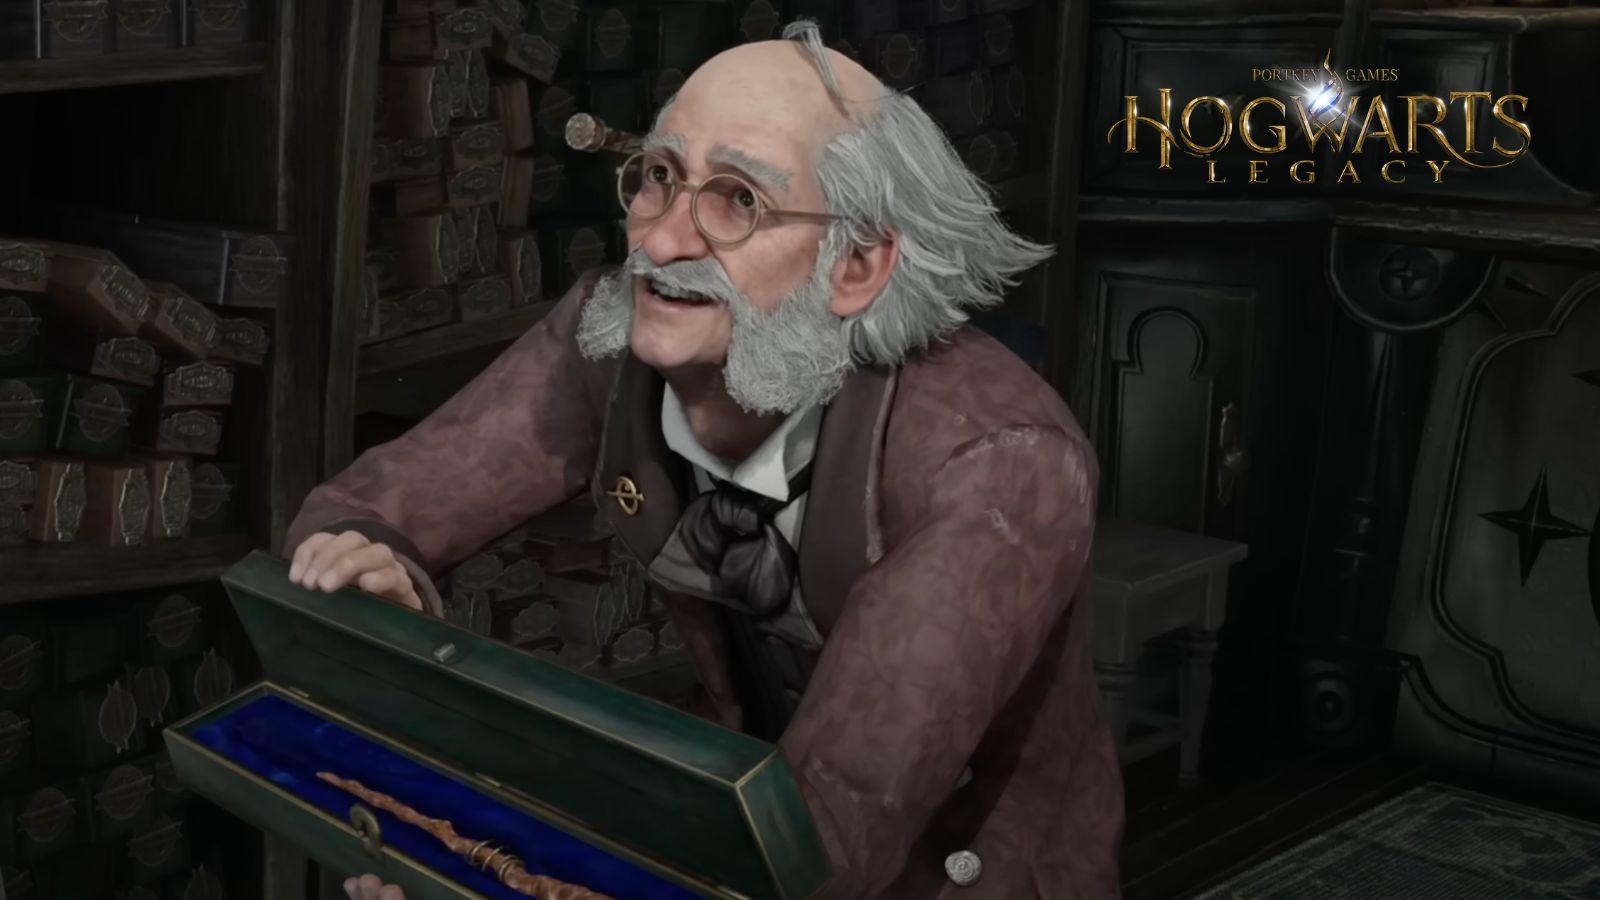 Hogwarts Legacy - The Best Harry Potter Game Yet?